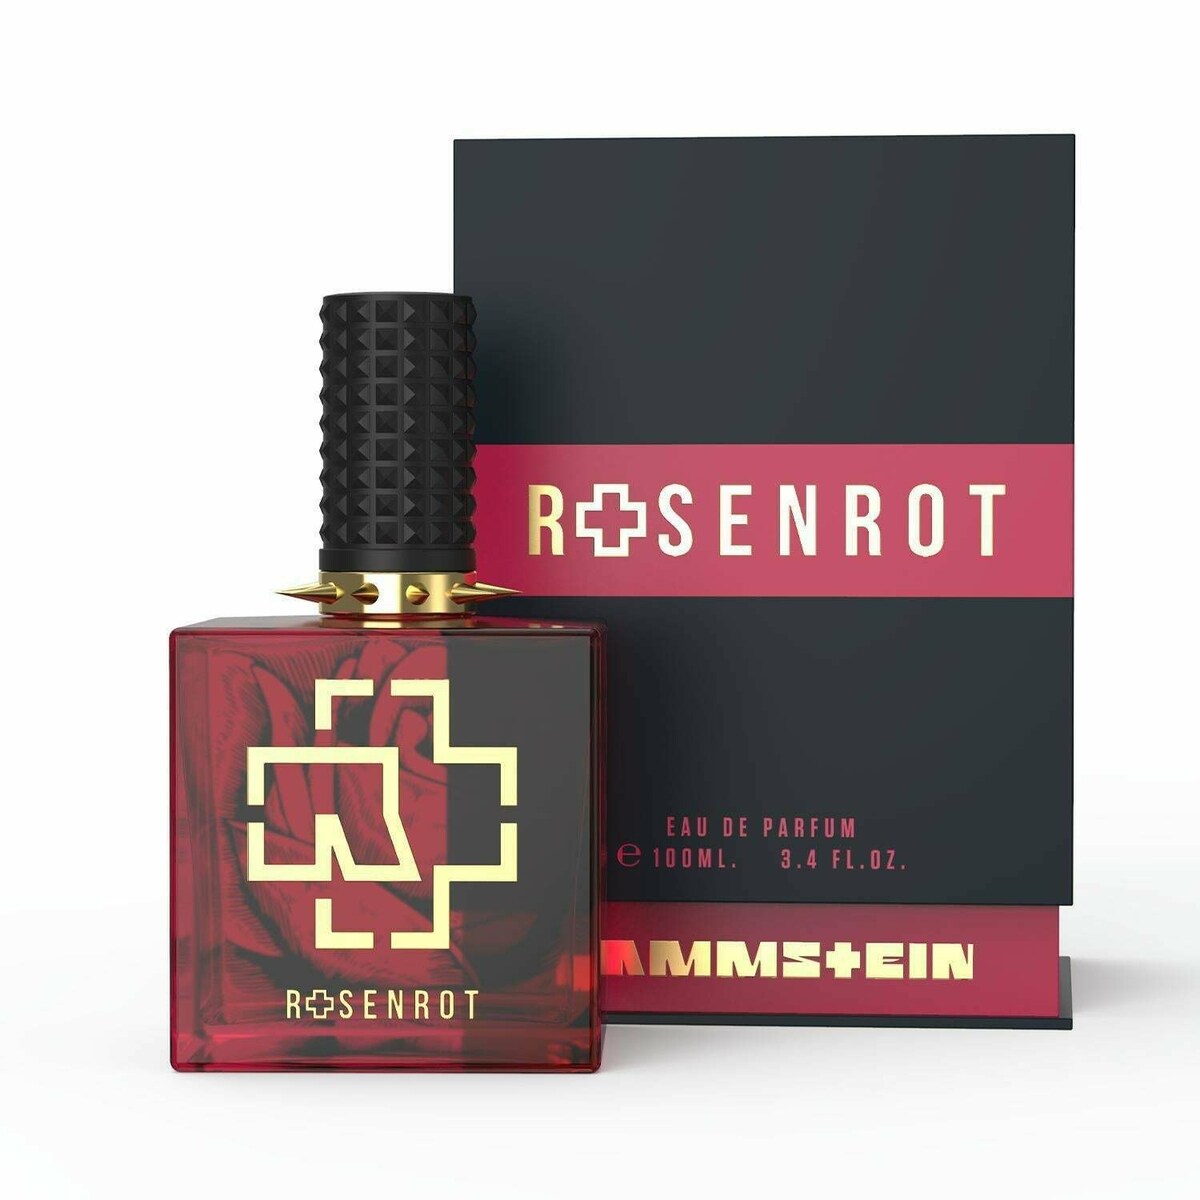 Rosenrot by Rammstein » Reviews & Perfume Facts